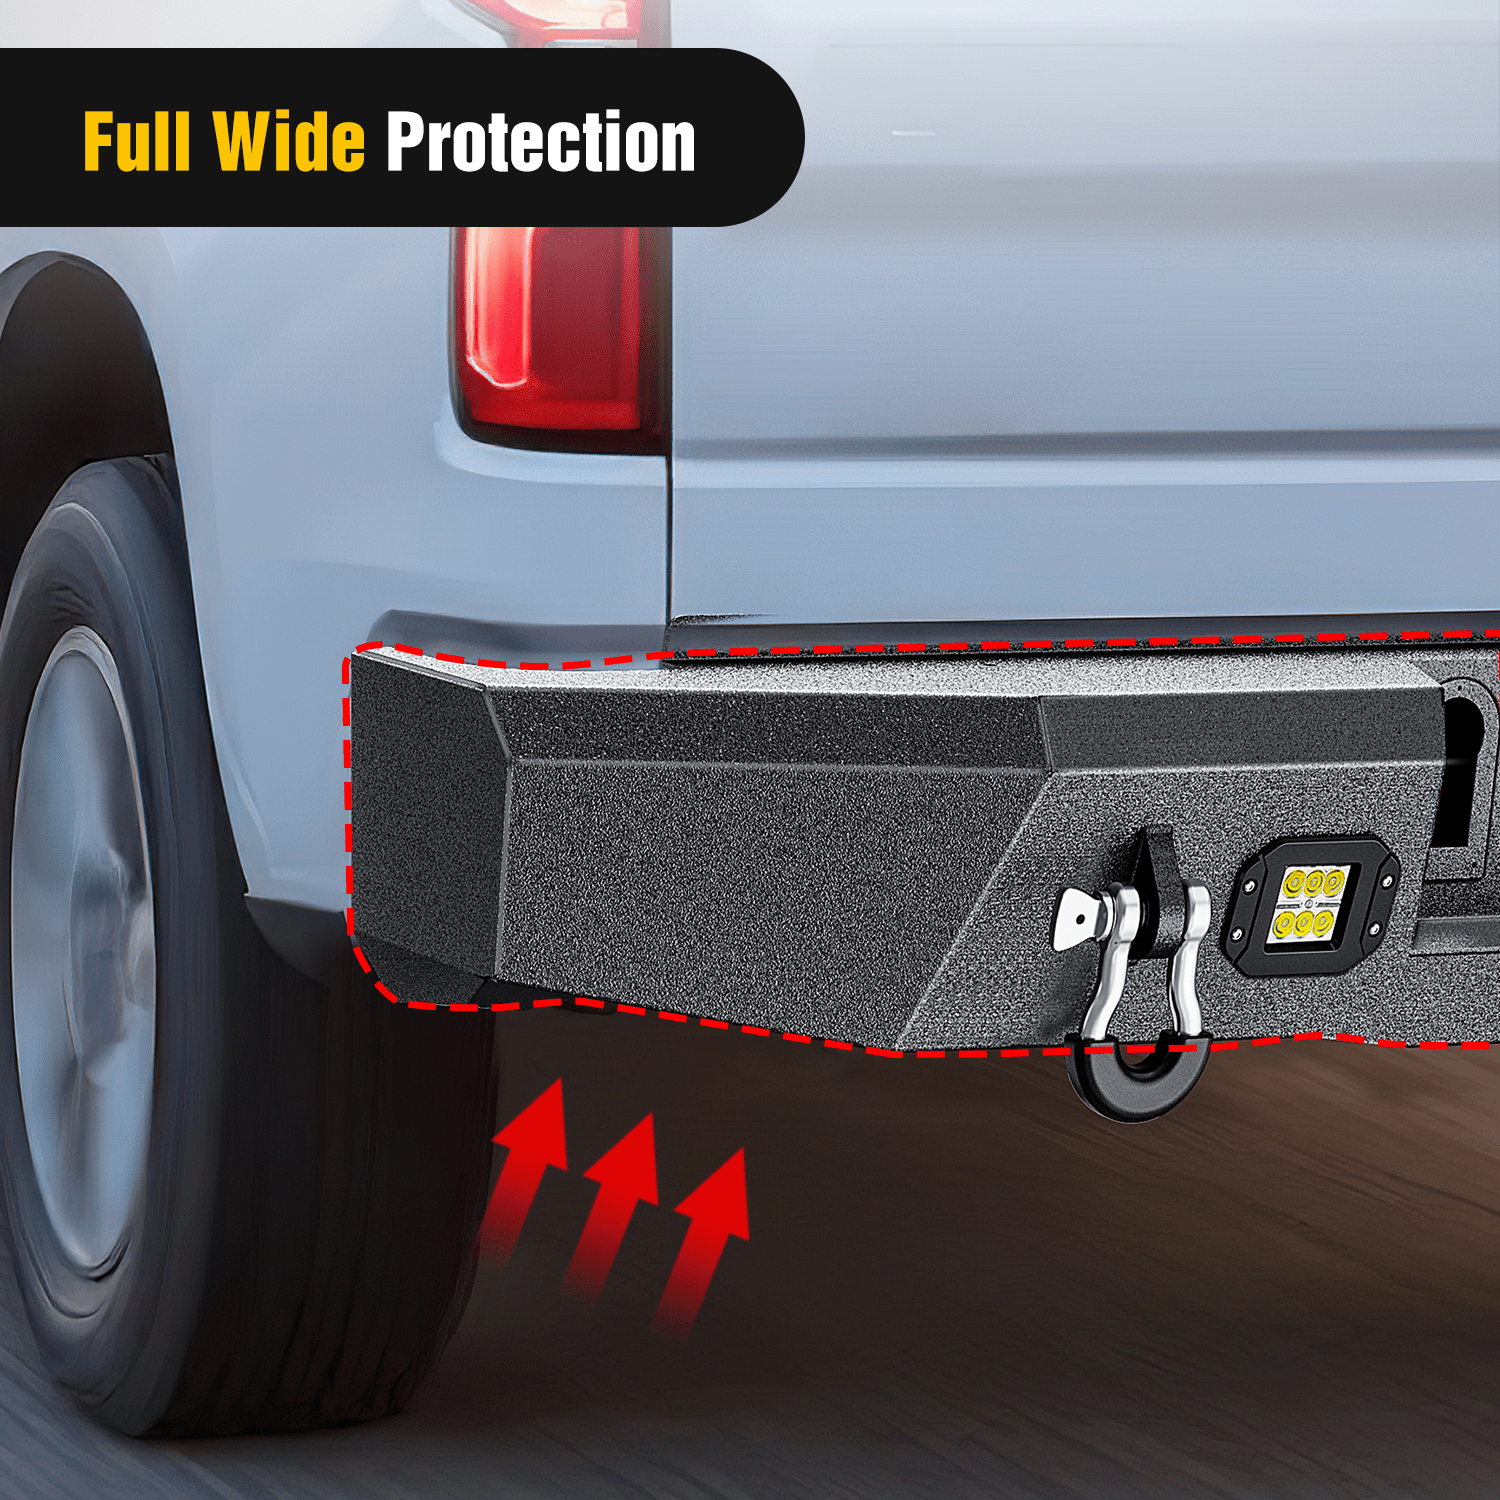 Rear Step Bumper for 2014-2018 Chevy Silverado/GMC Sierra 1500 Pickup Trucks Textured Solid Steel with 2 Upgraded Flood 18W LED Lights D-Rings Nilight